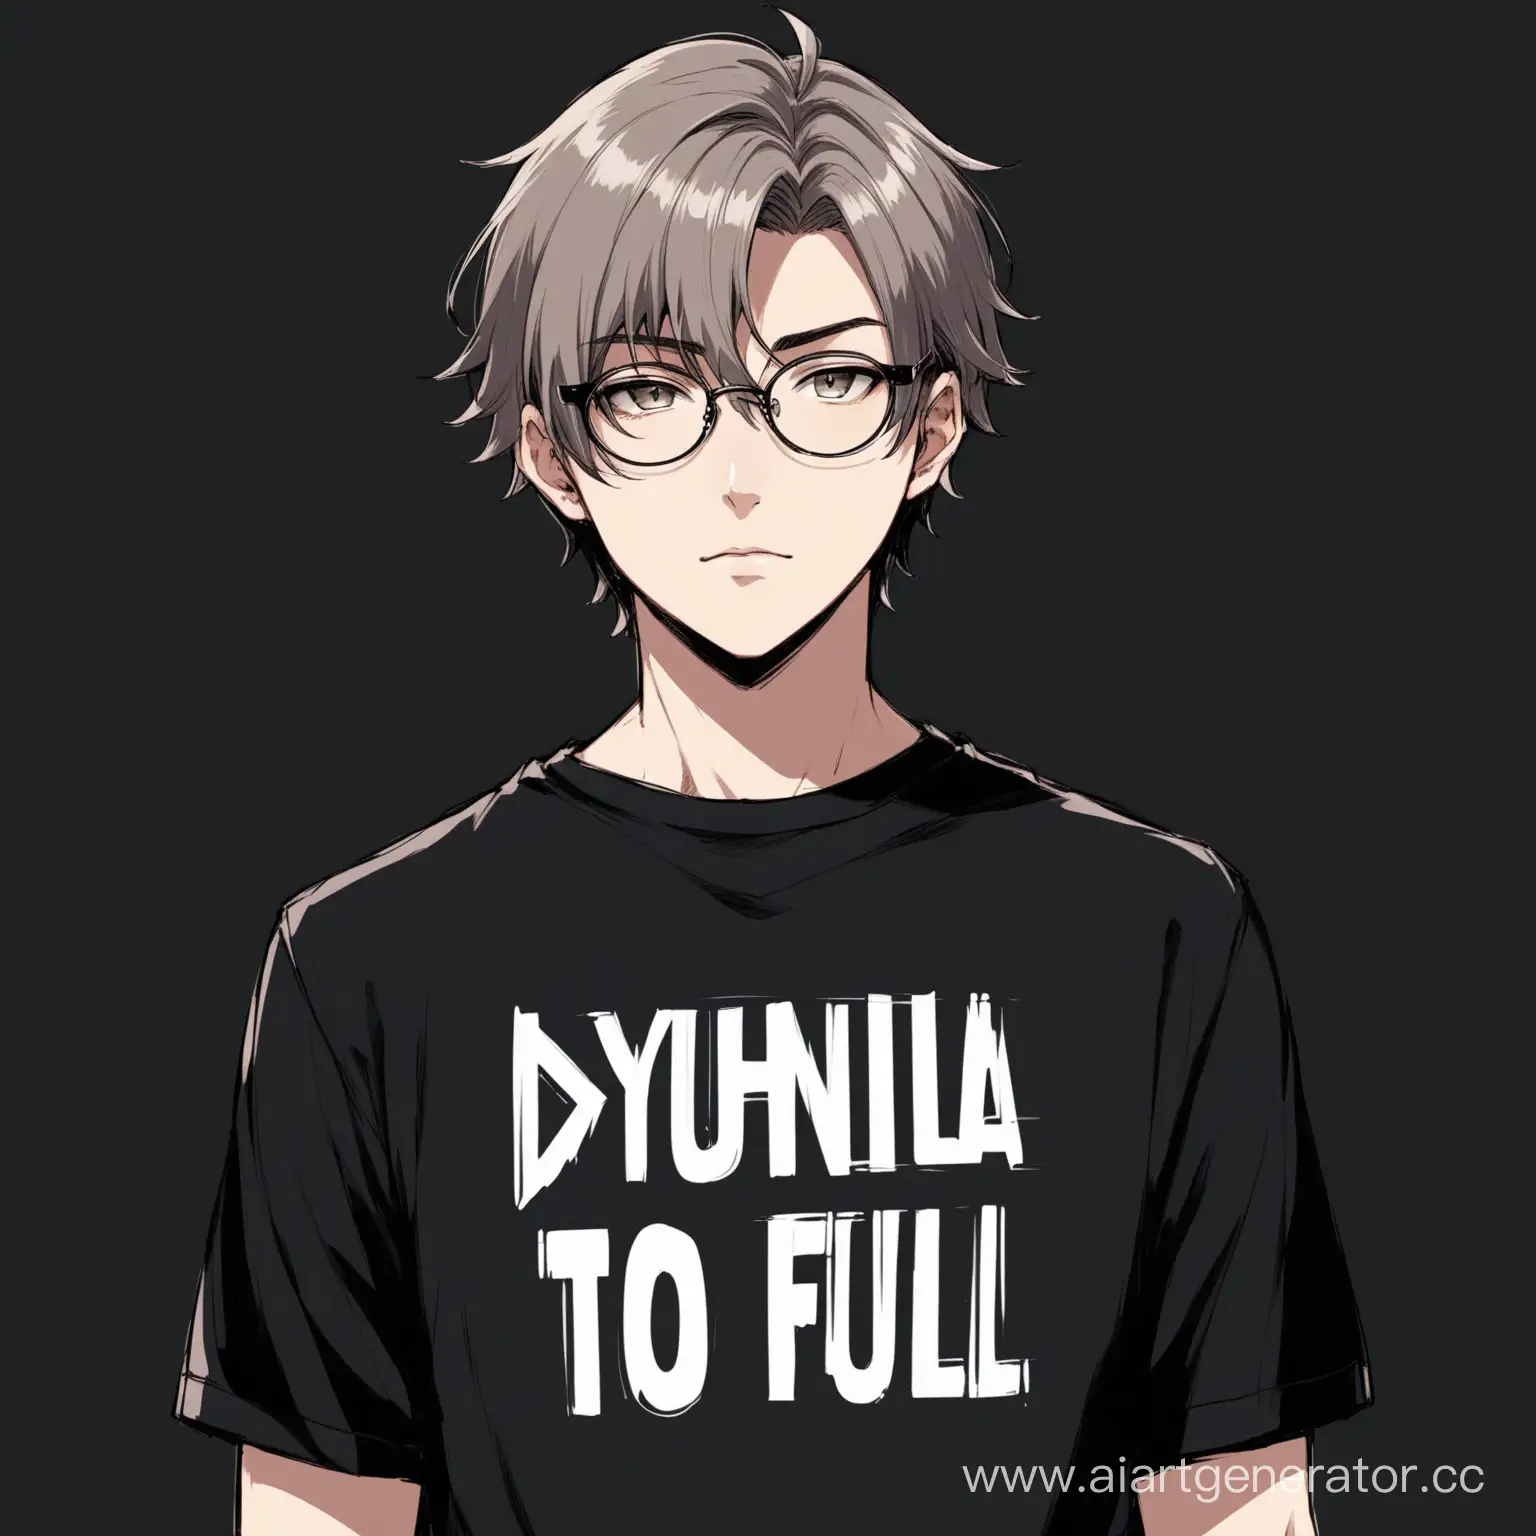 Anime-Style-Portrait-of-a-23YearOld-Guy-in-Black-TShirt-and-Glasses-on-Black-Background